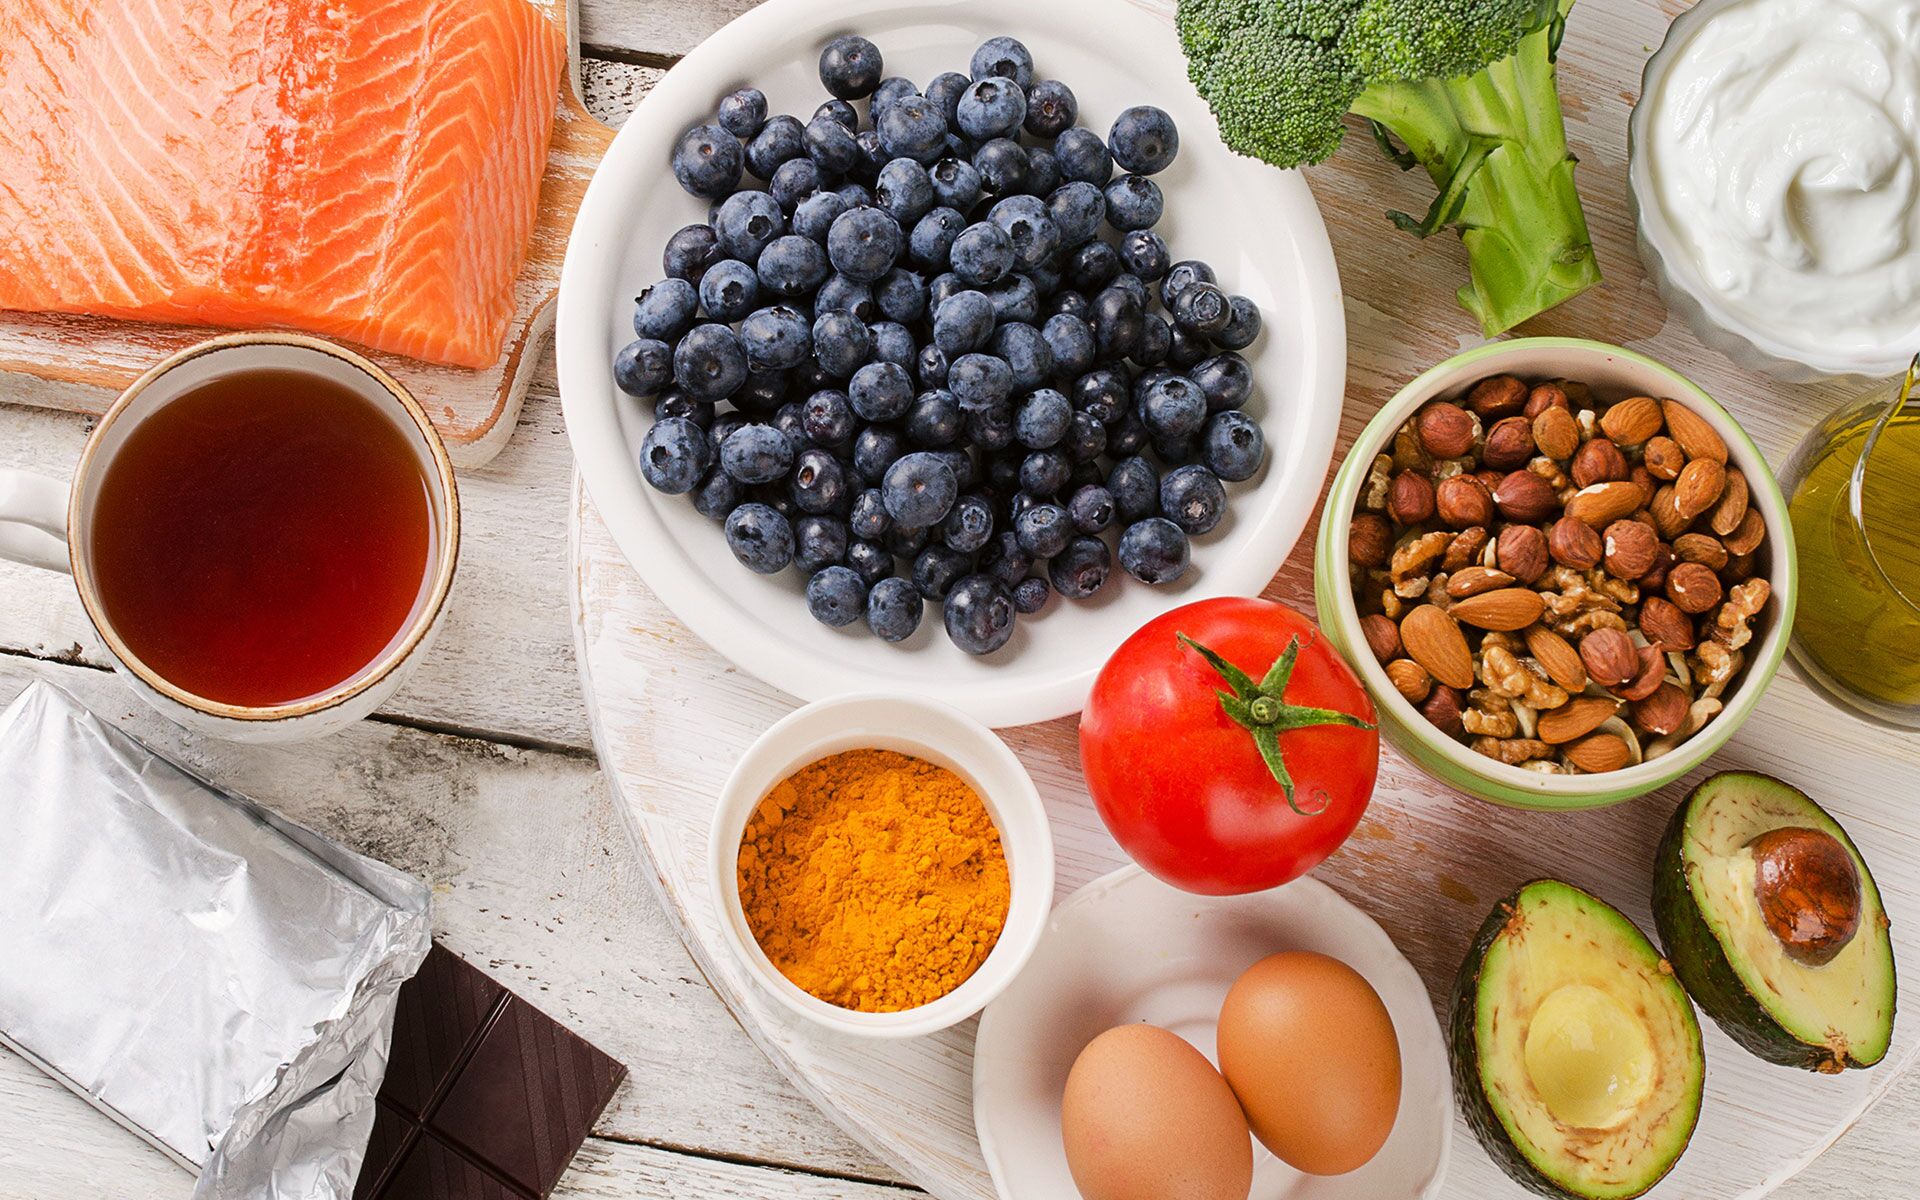 spread of salmon, blueberries, avocado, eggs and sauces on a table